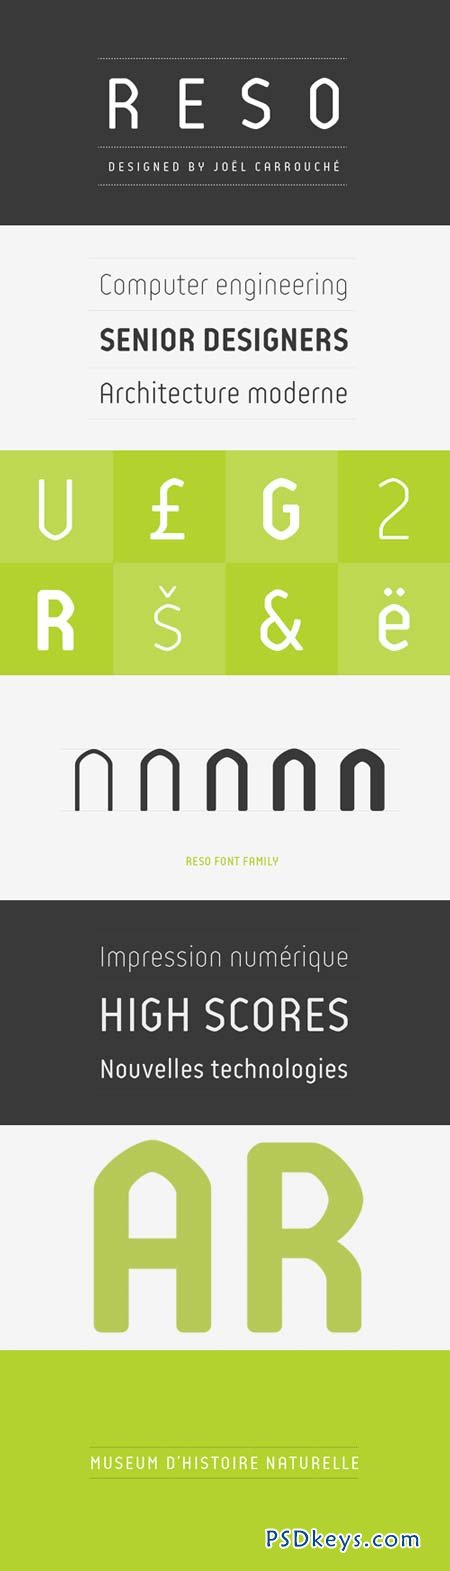 Reso Font Family - 5 Fonts for $120